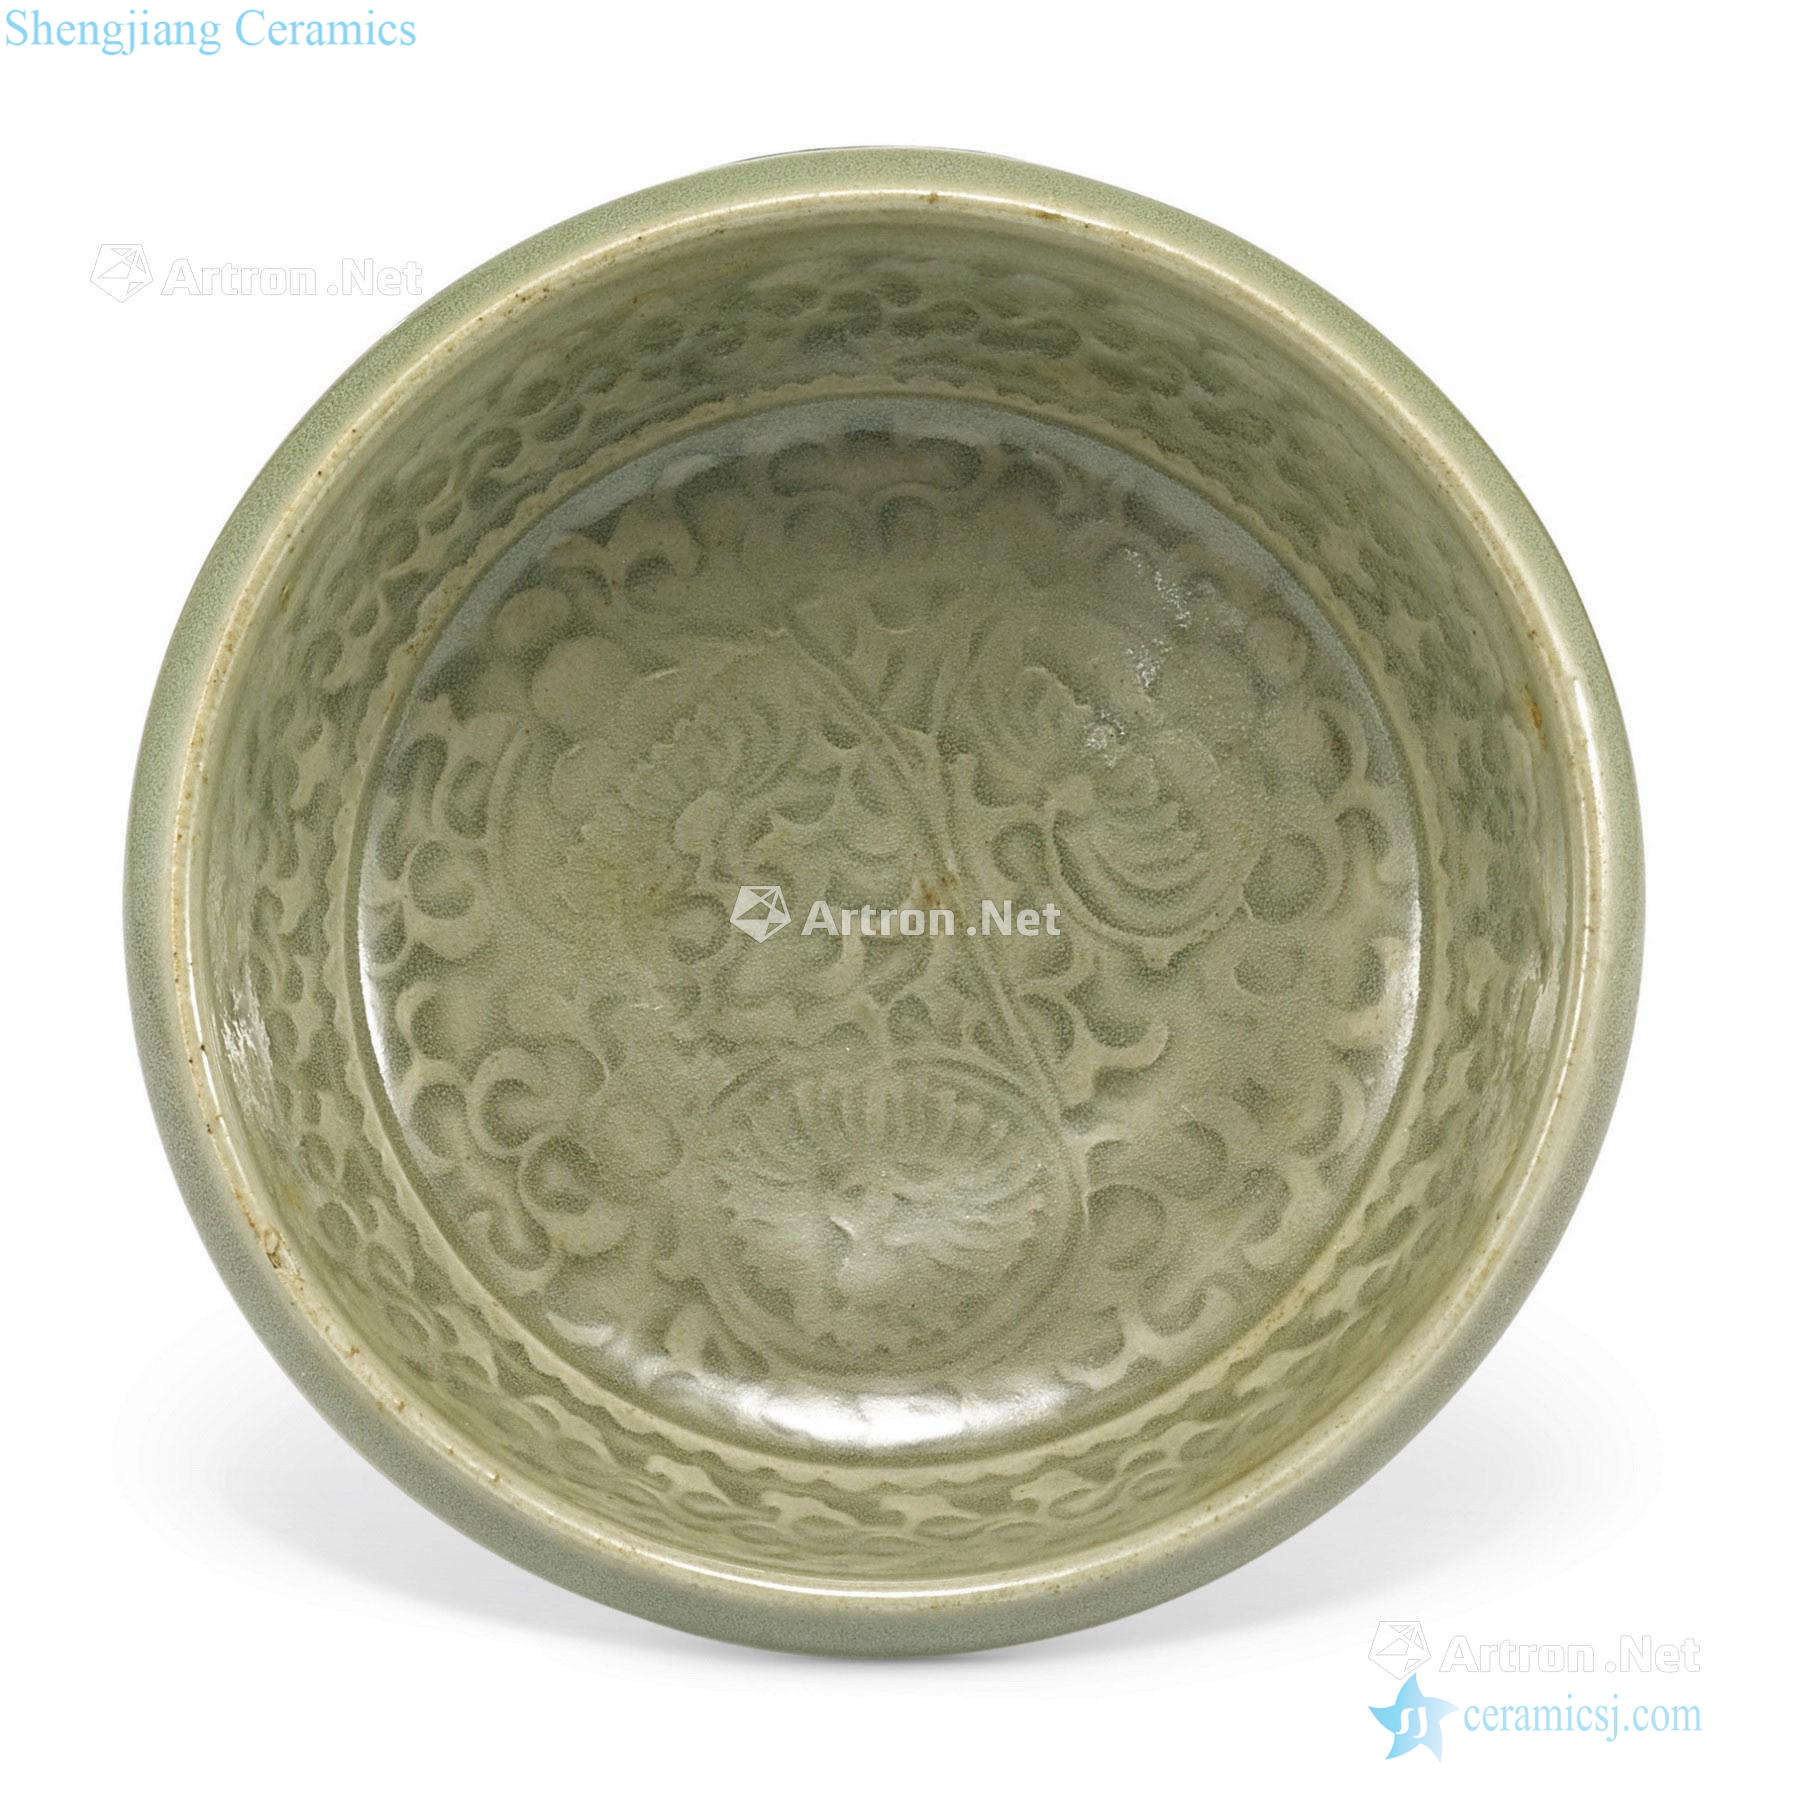 The song dynasty Yao state green glaze branch chrysanthemum tray